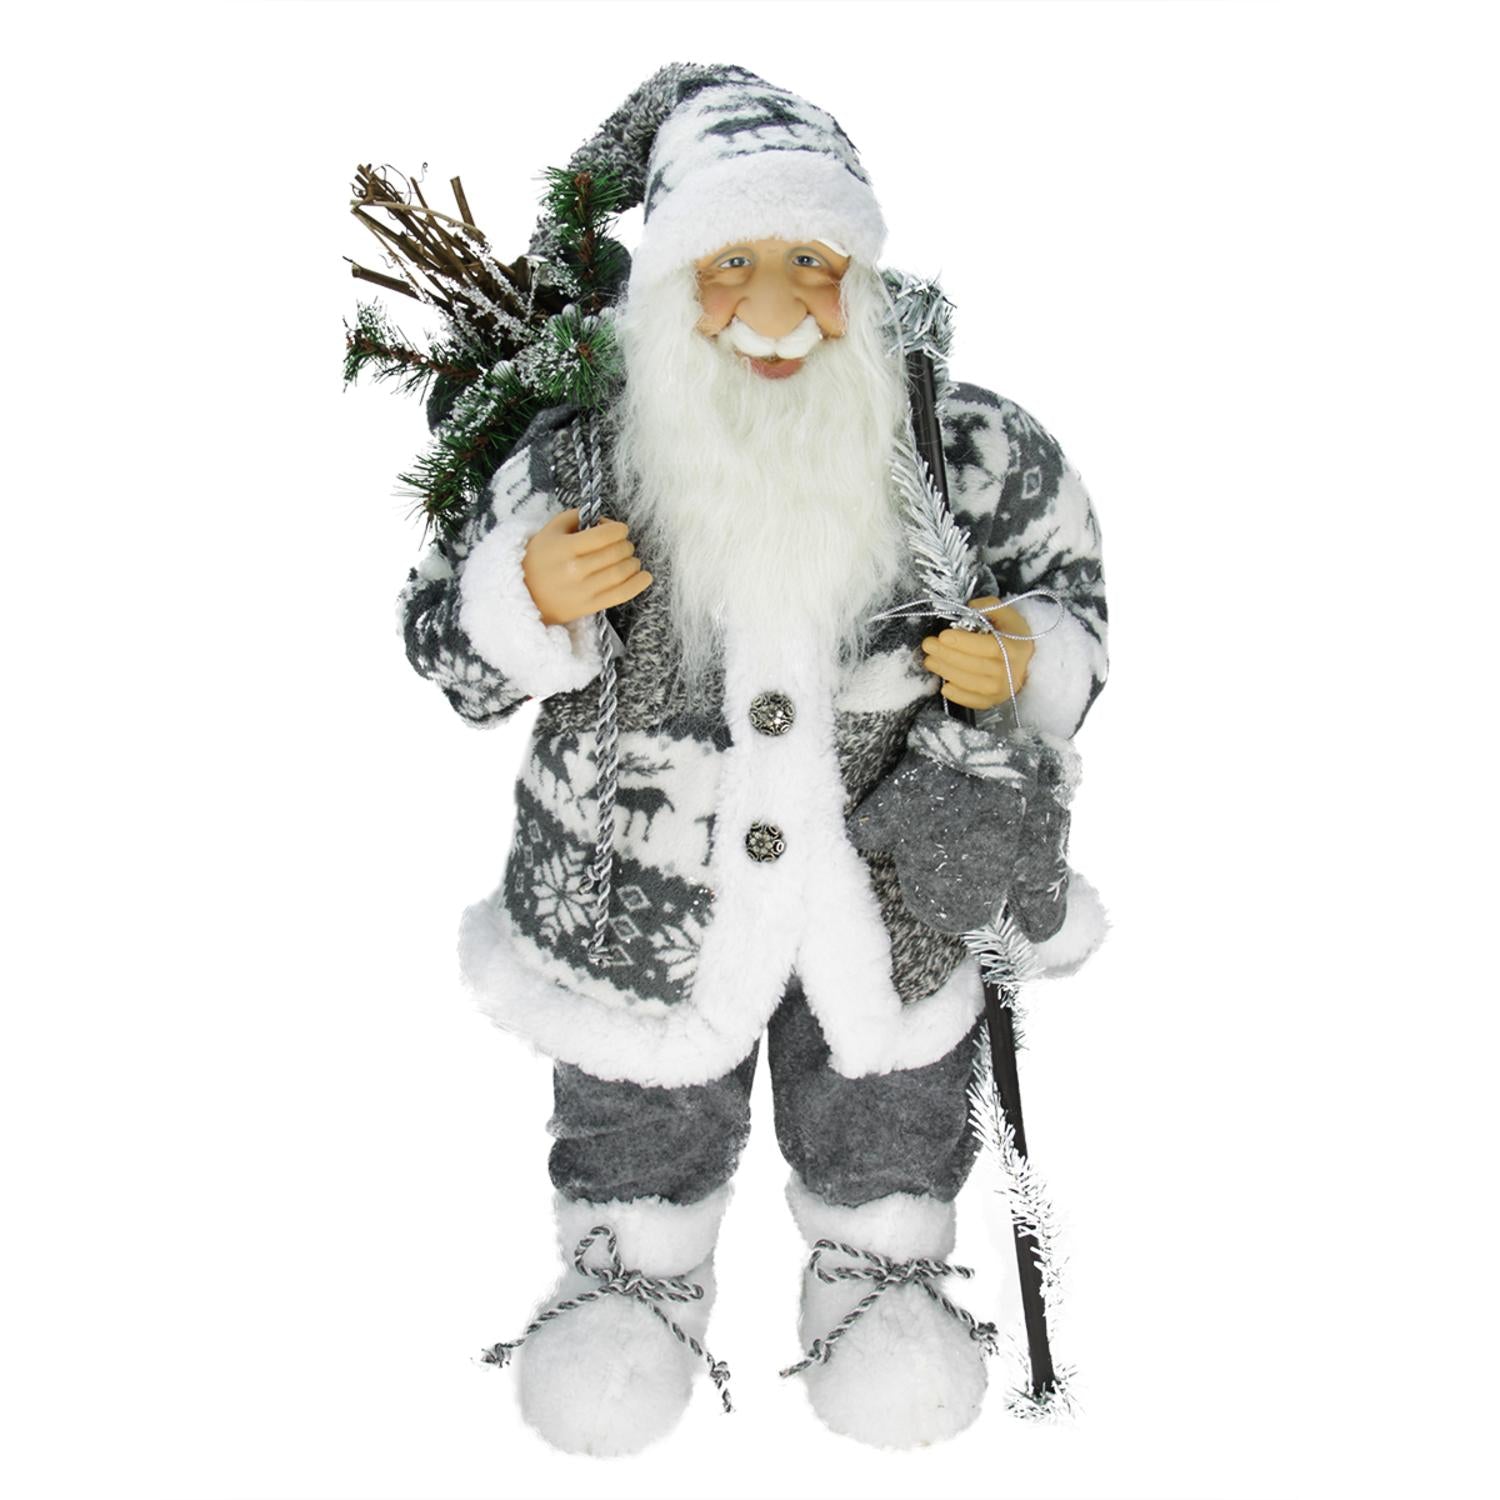 24" Country Patchwork Standing Santa Claus Christmas Figure